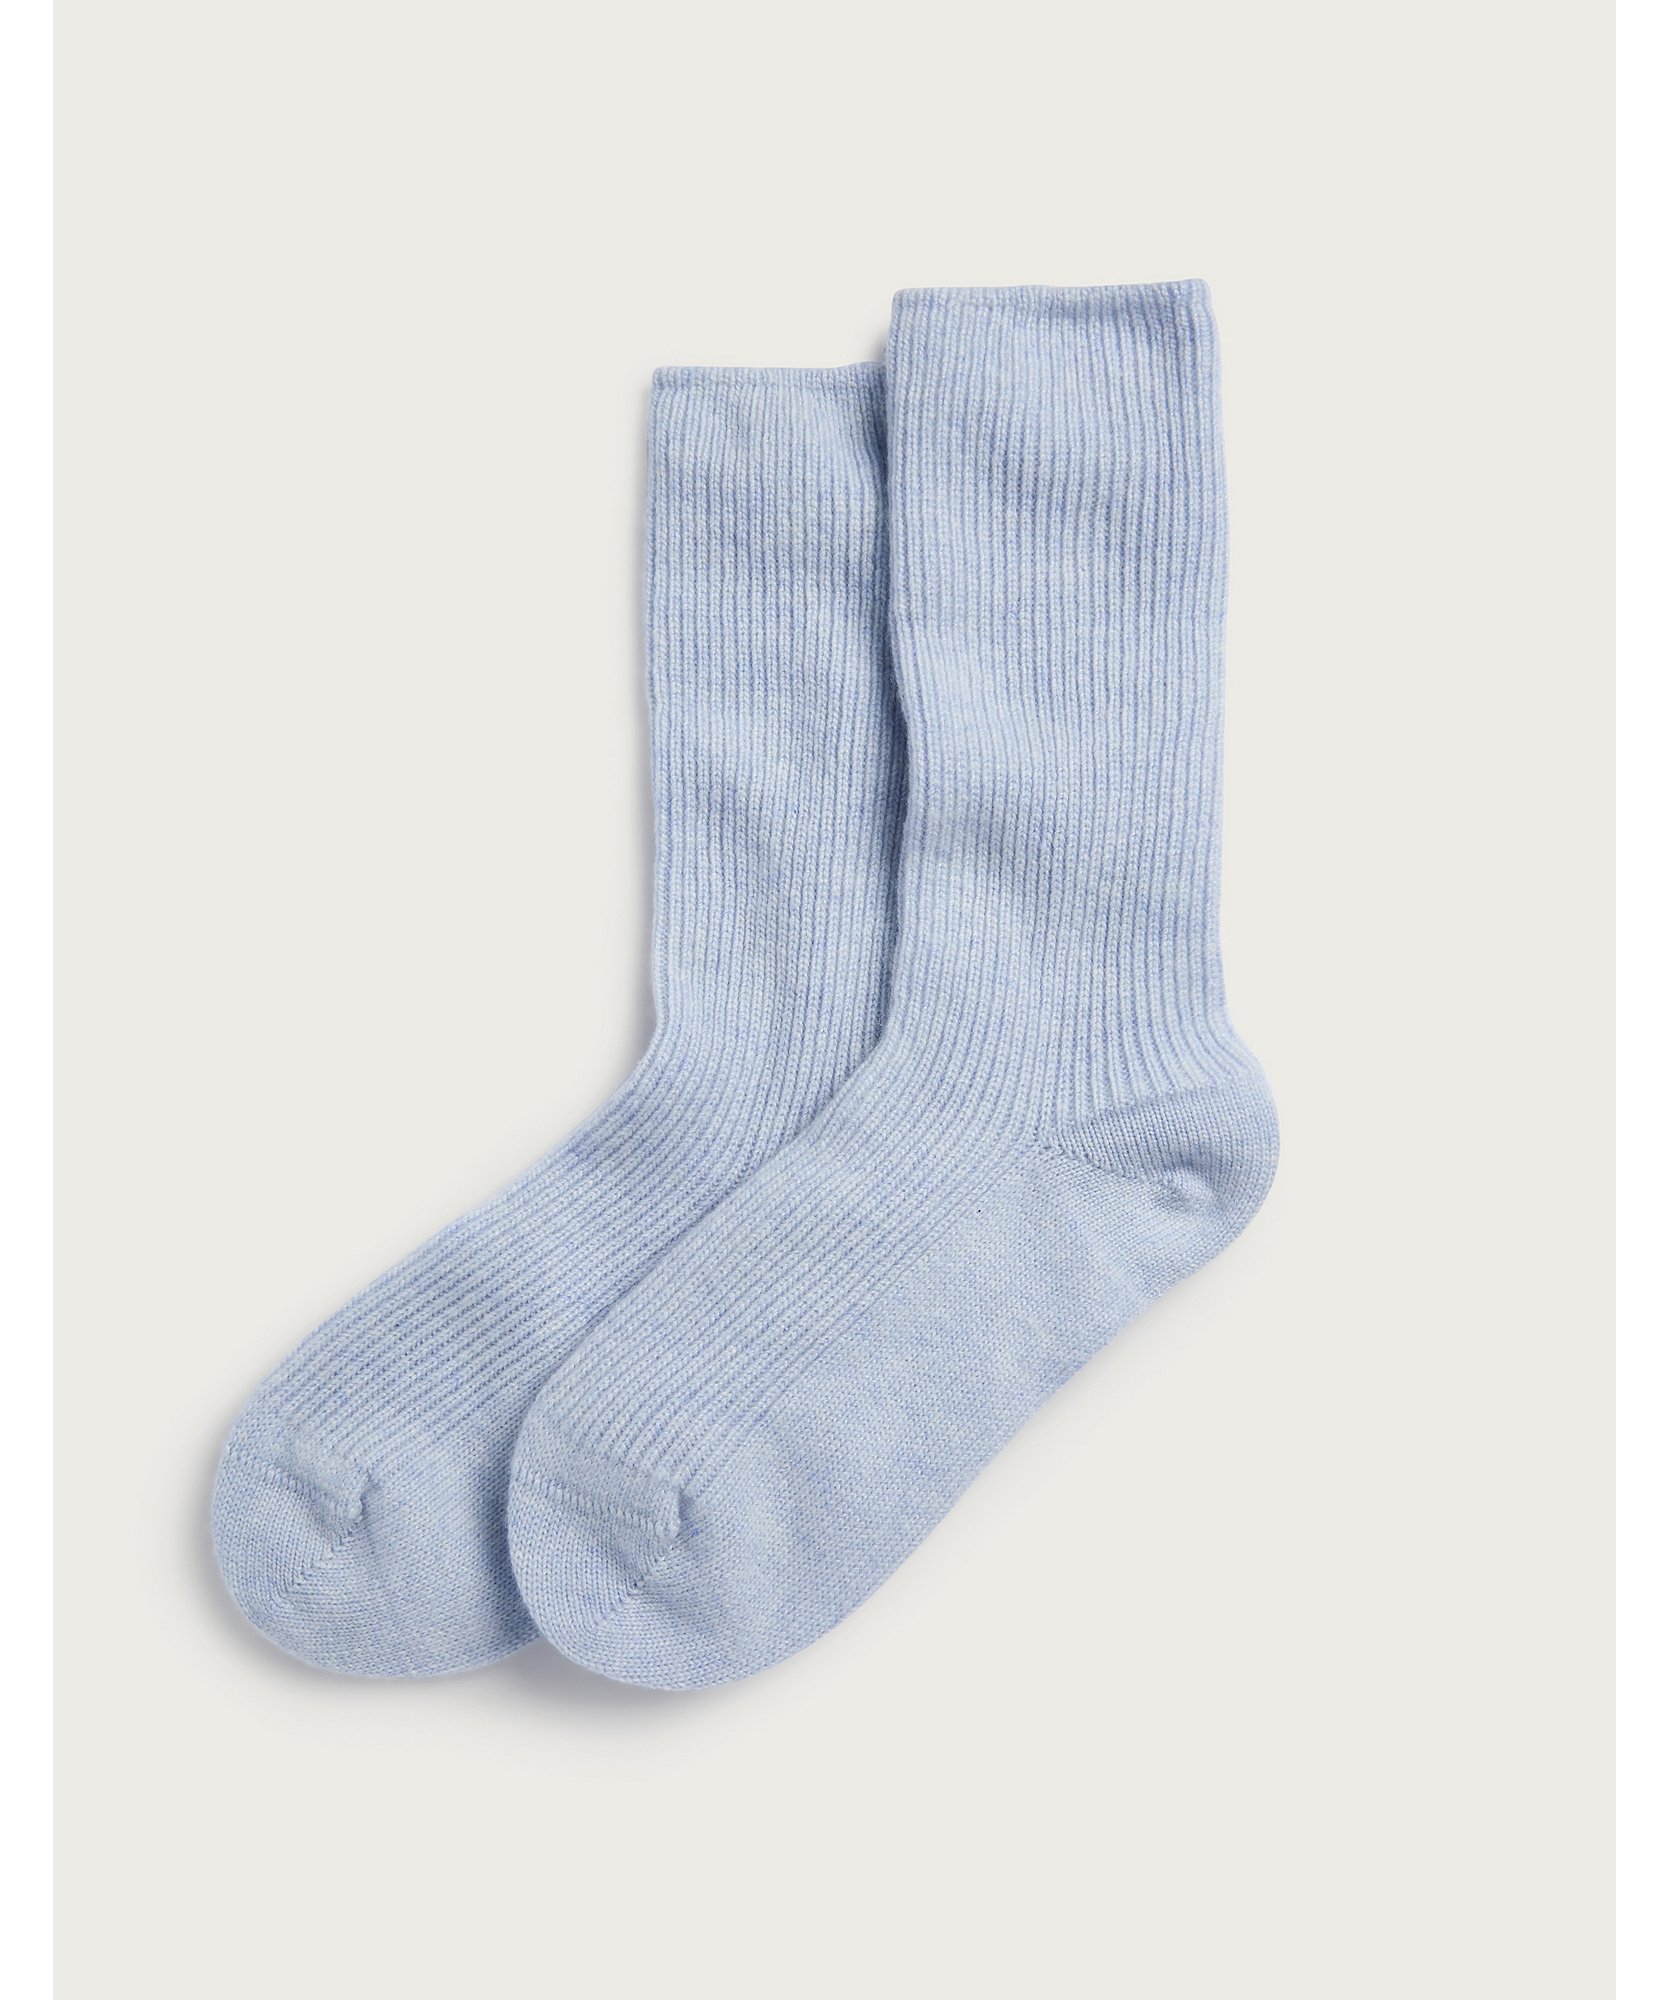 Womens Luxury Cashmere Bed Socks in a Gift Box 